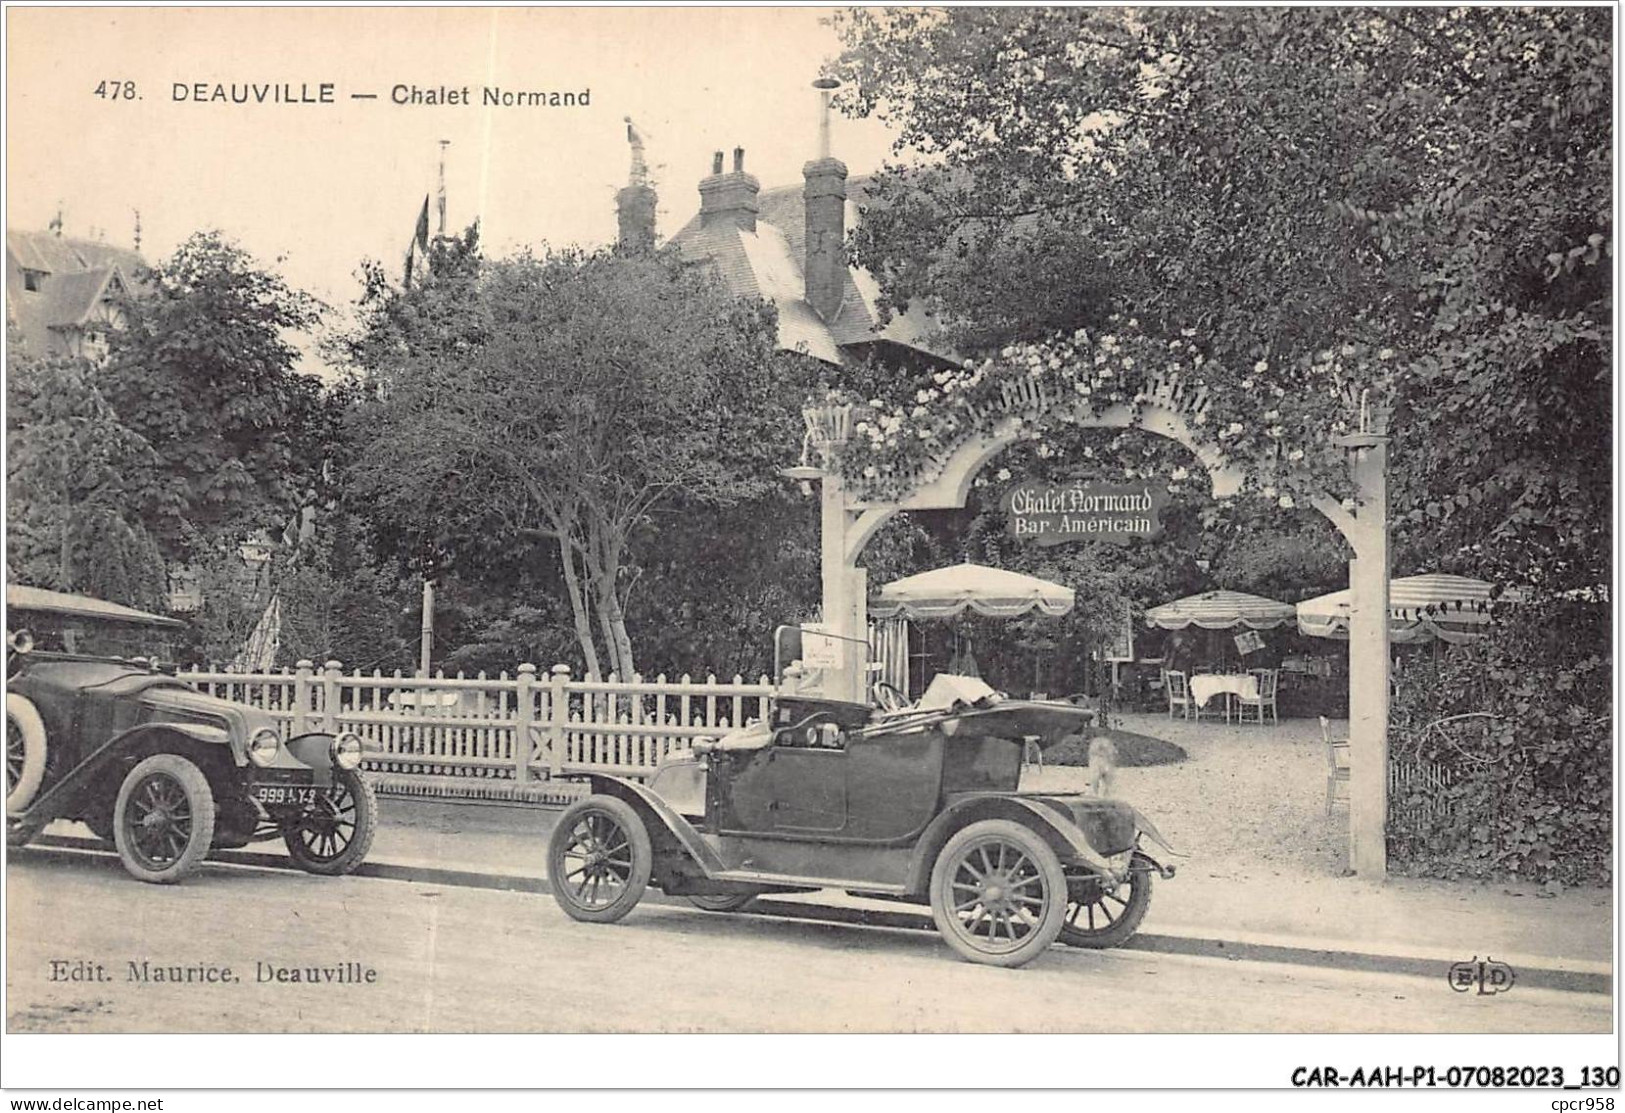 CAR-AAHP1-14-0066 - DEAUVILLE - Chalet Normand - Deauville